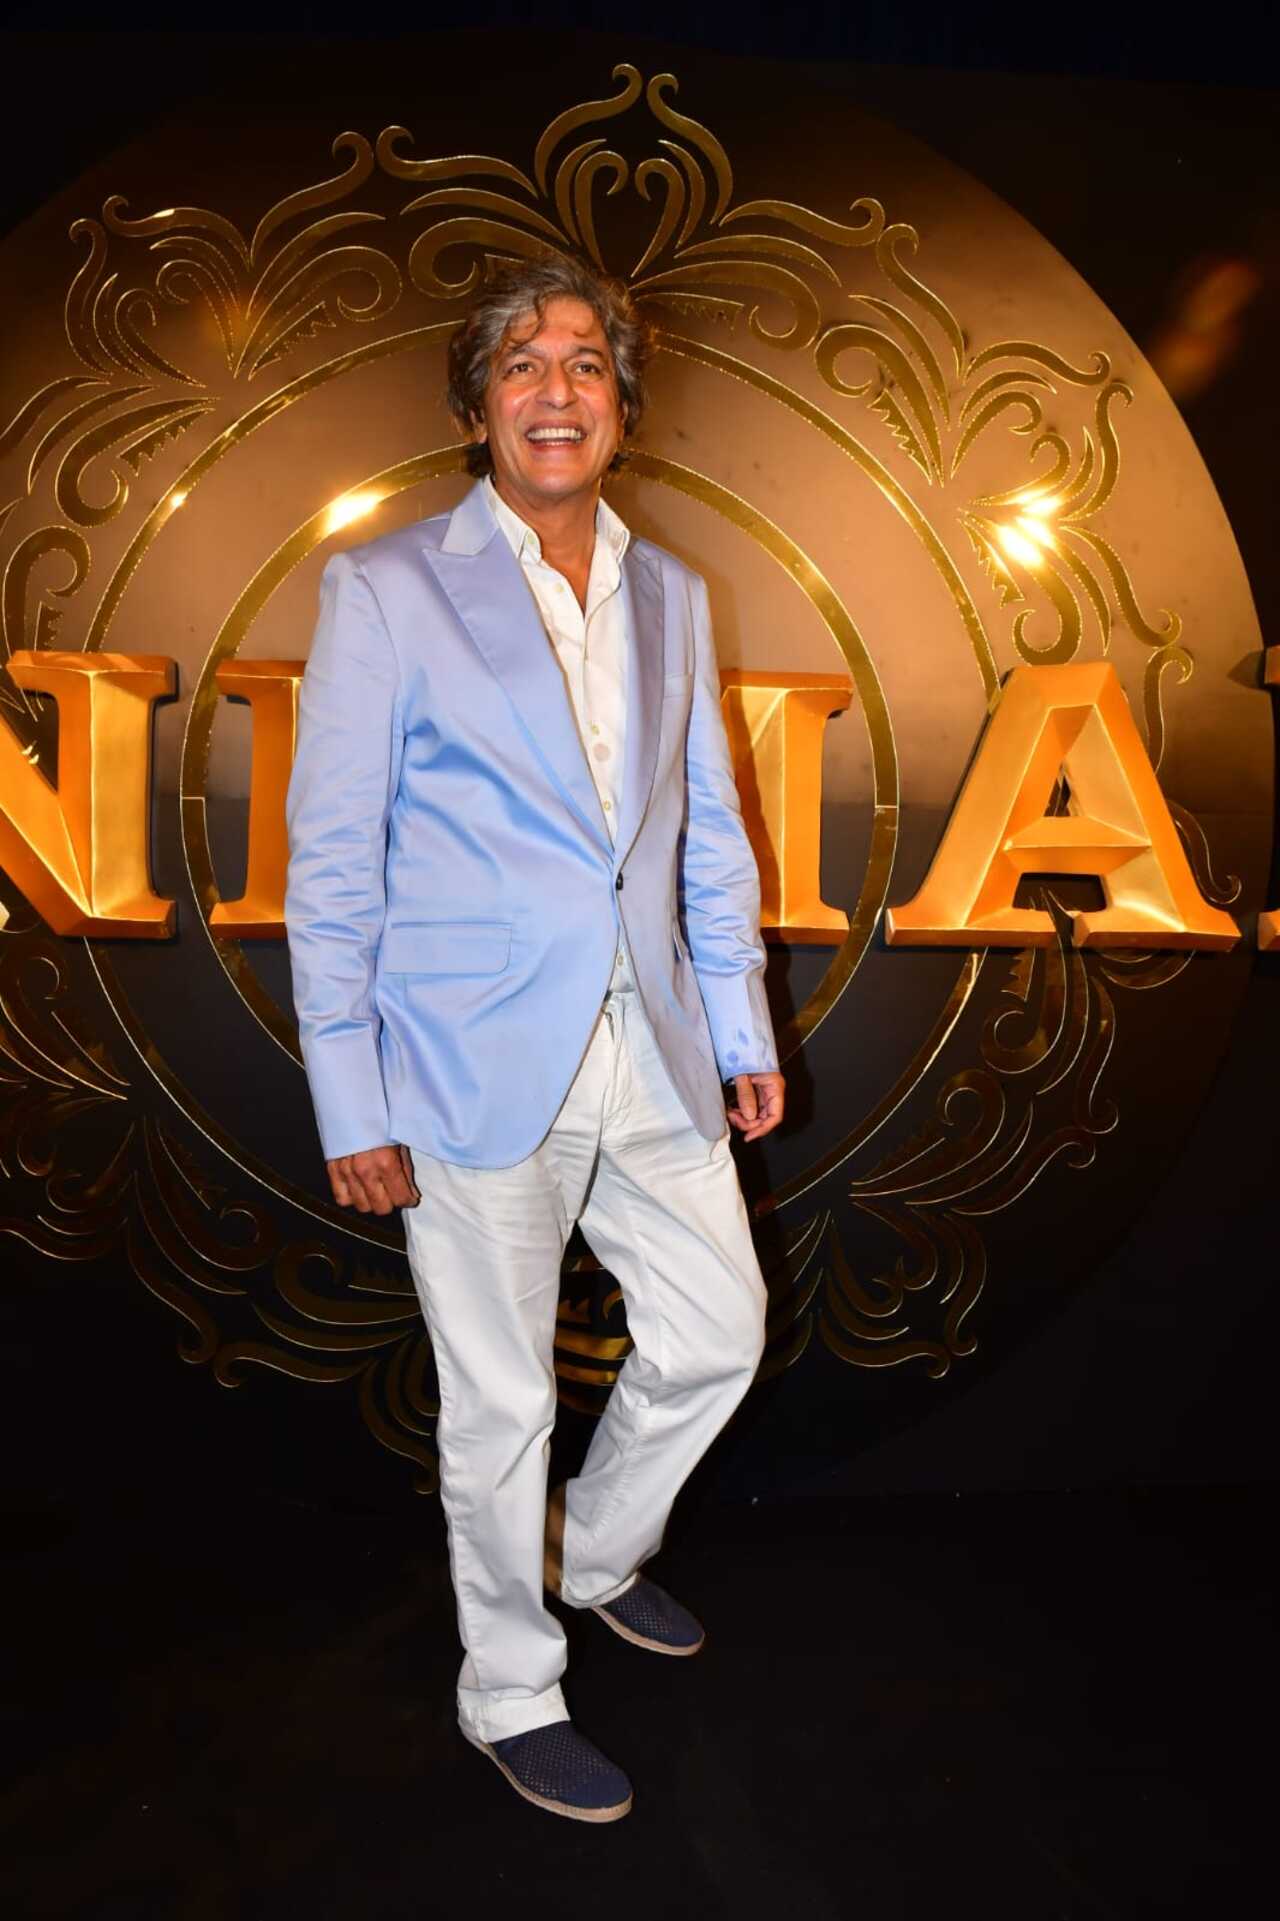 Chunky Panday was all smiles for the paps as he attended the party in a blue blazer and white shirt and pant